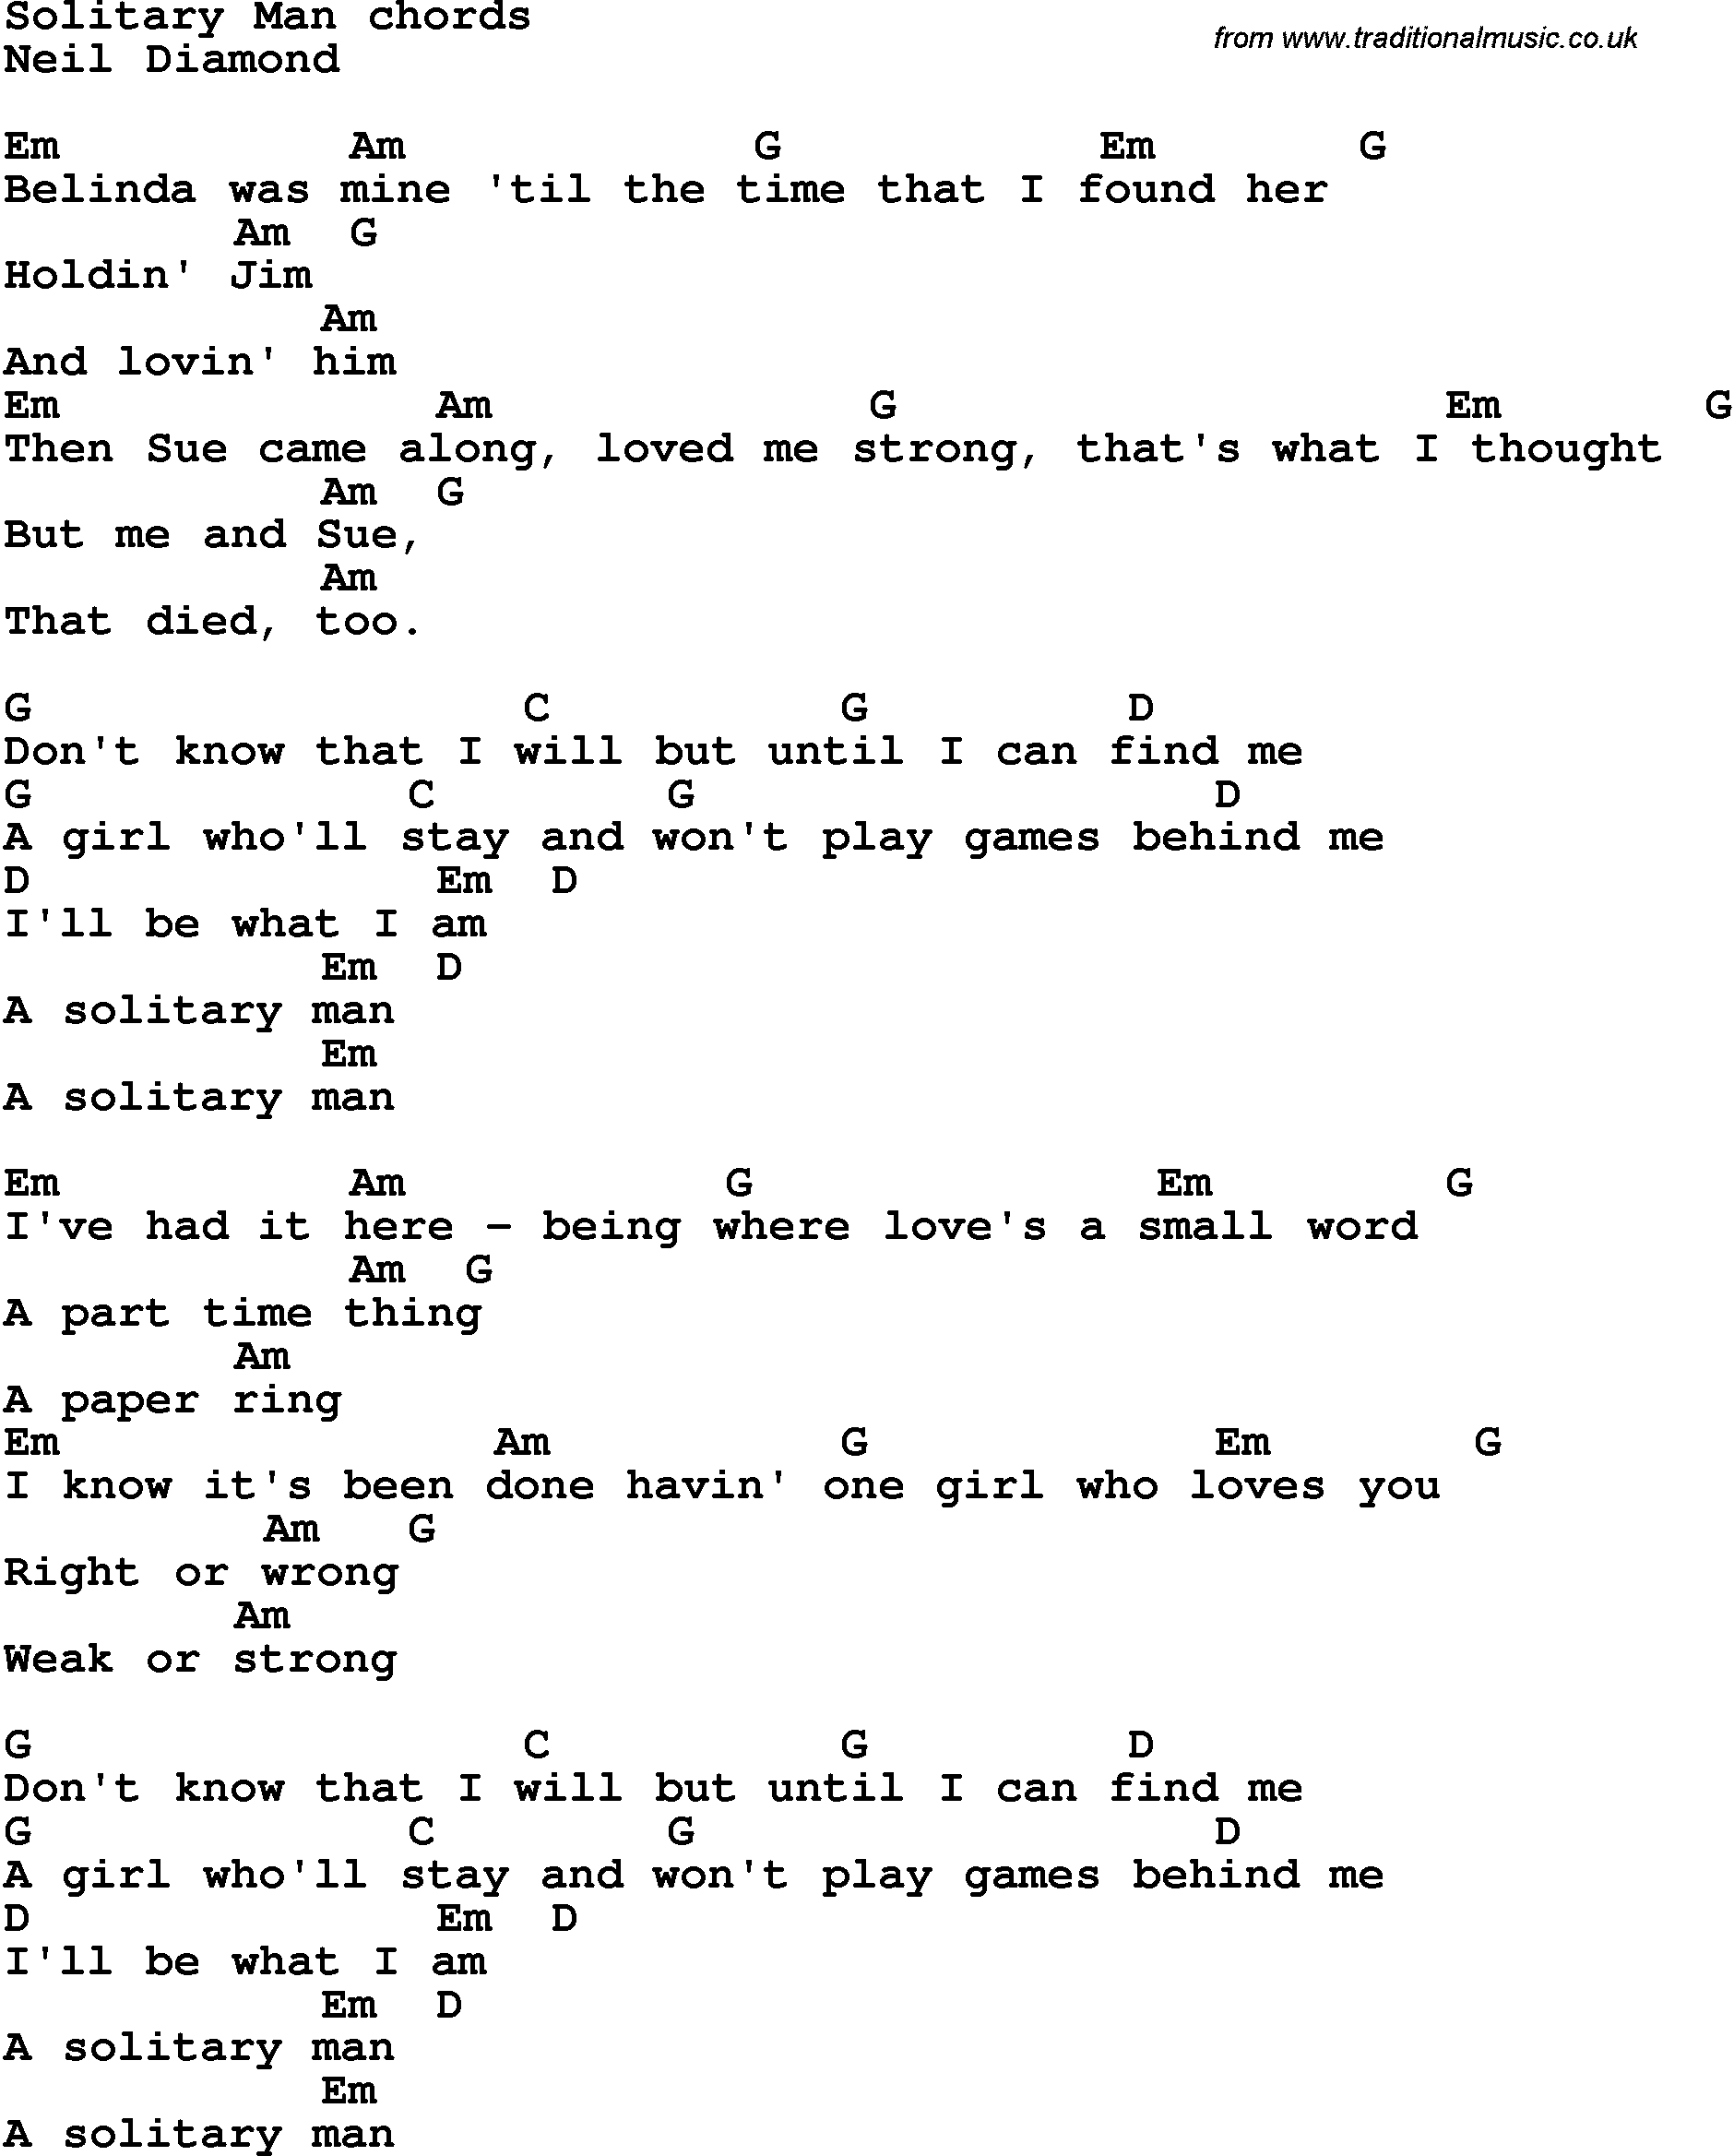 Song Lyrics with guitar chords for Solitary Man